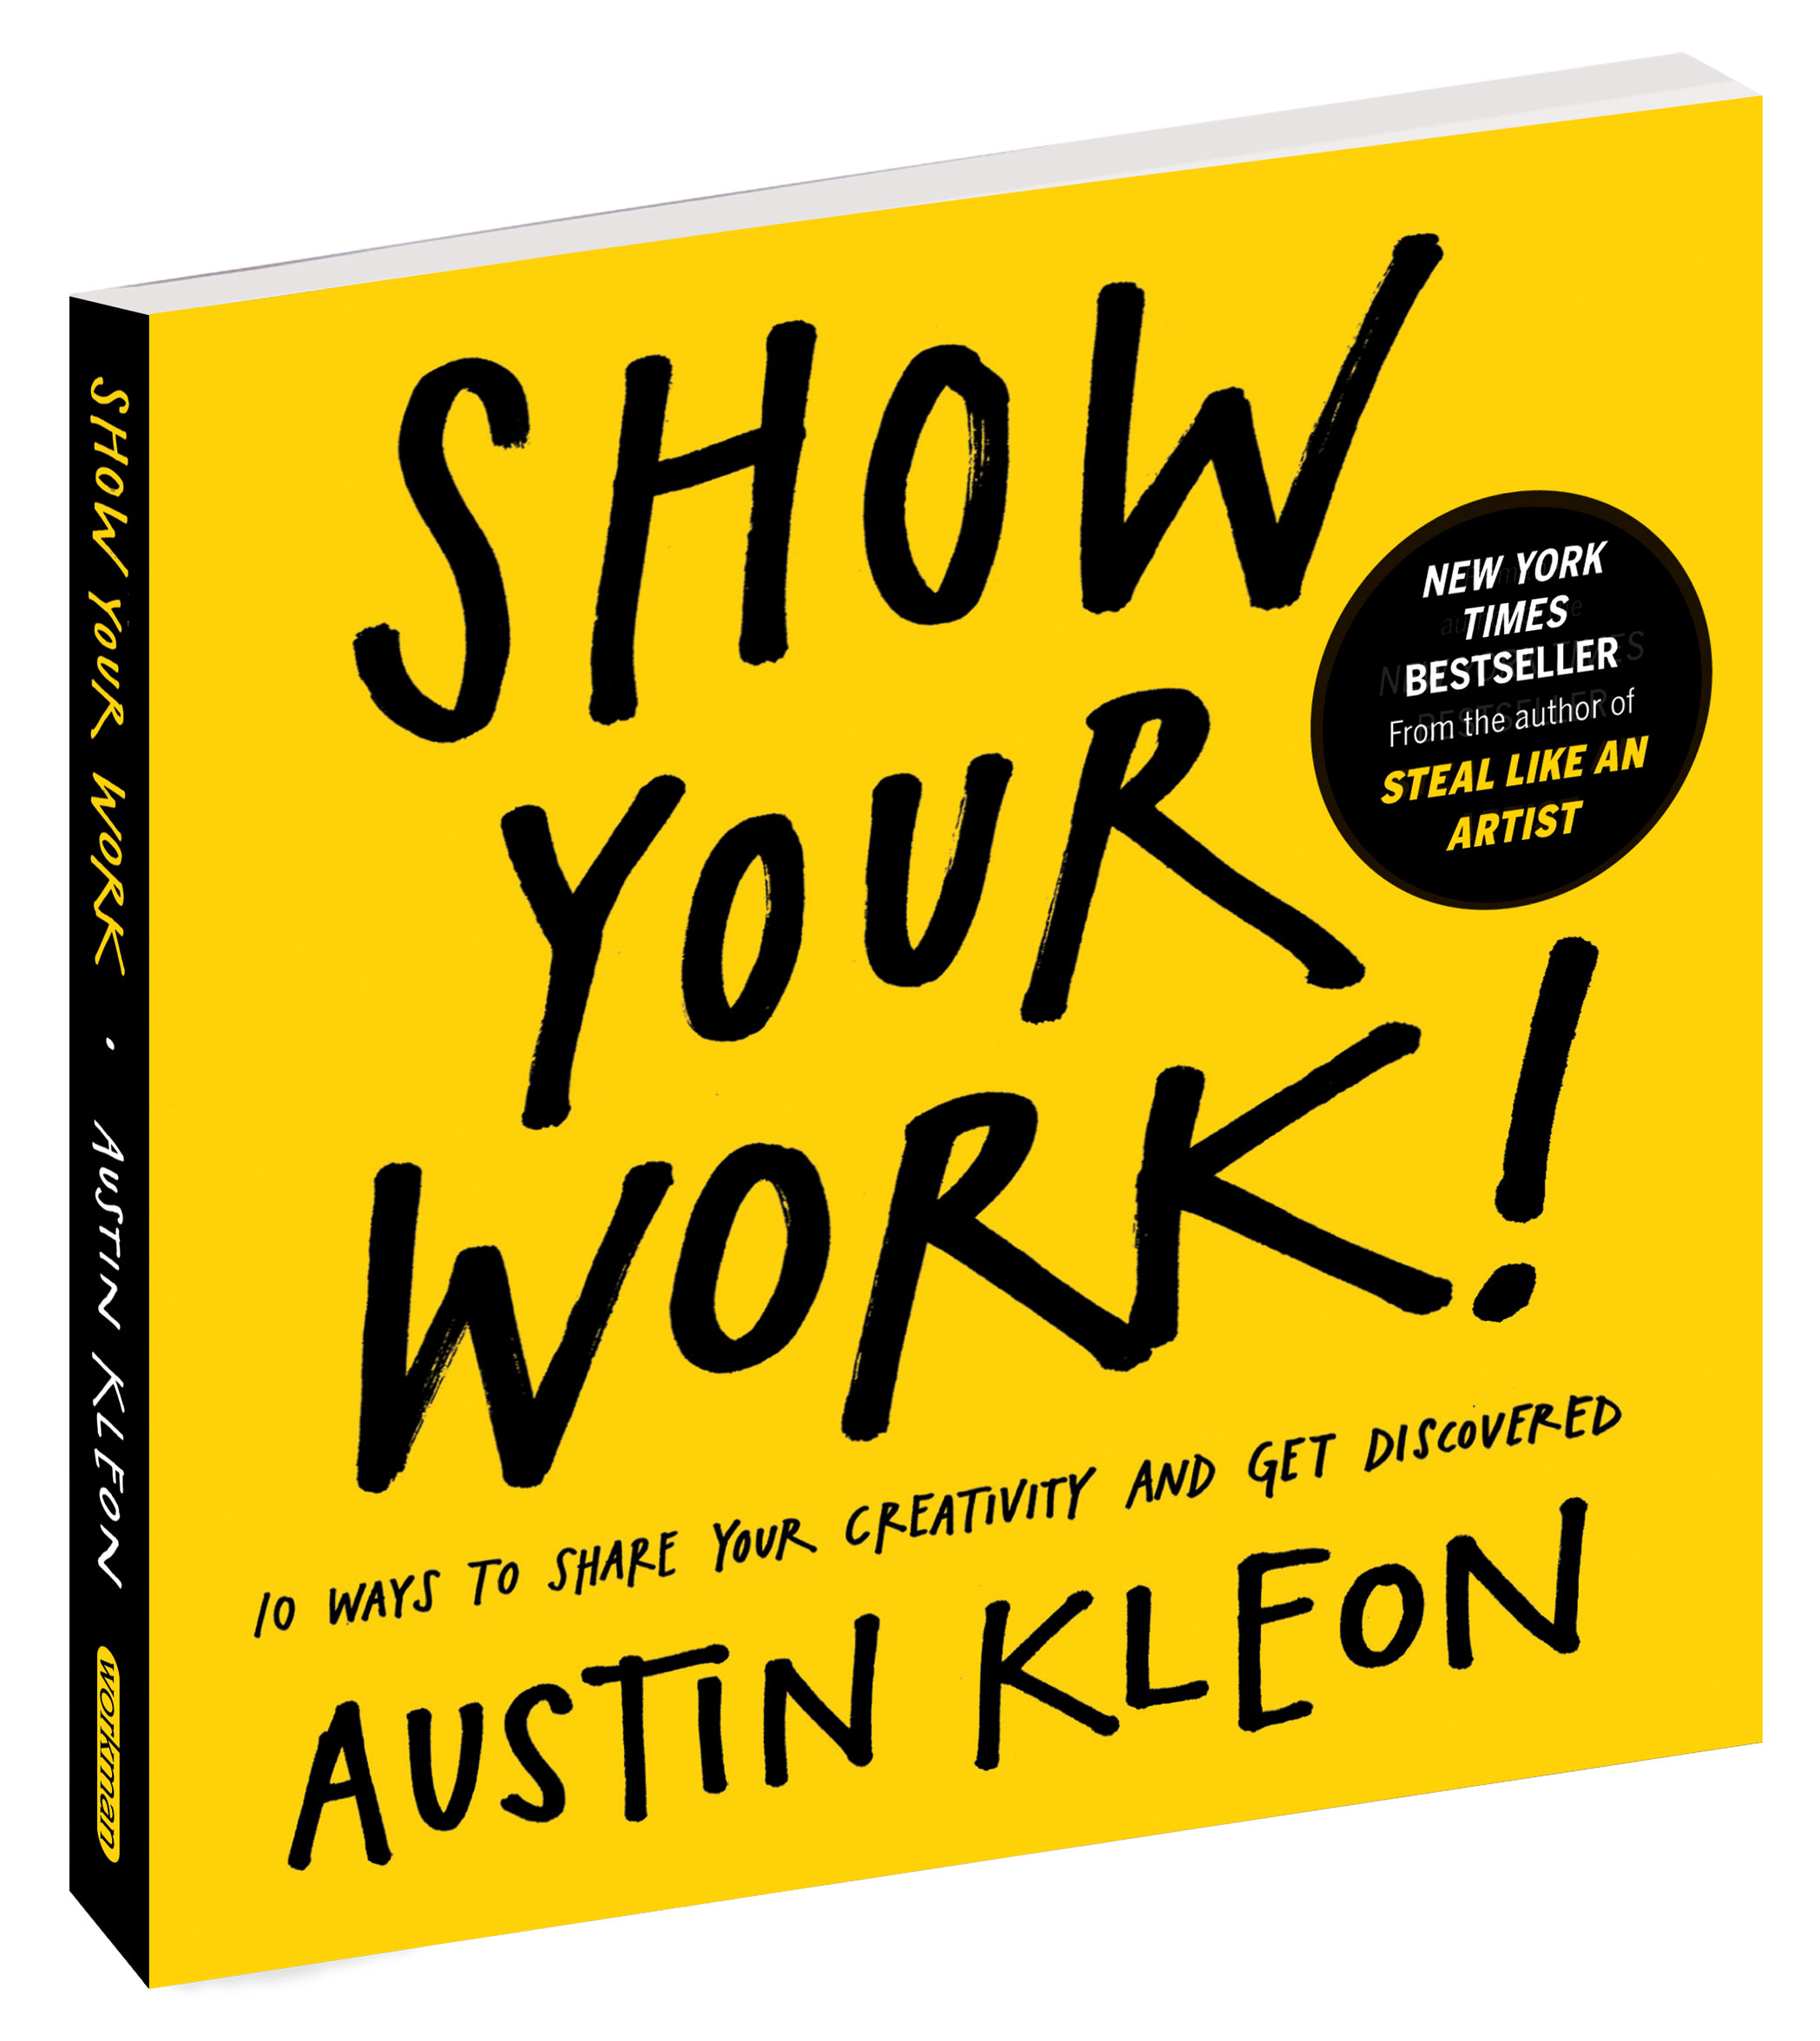 Show Your Work! a book by Austin Kleon